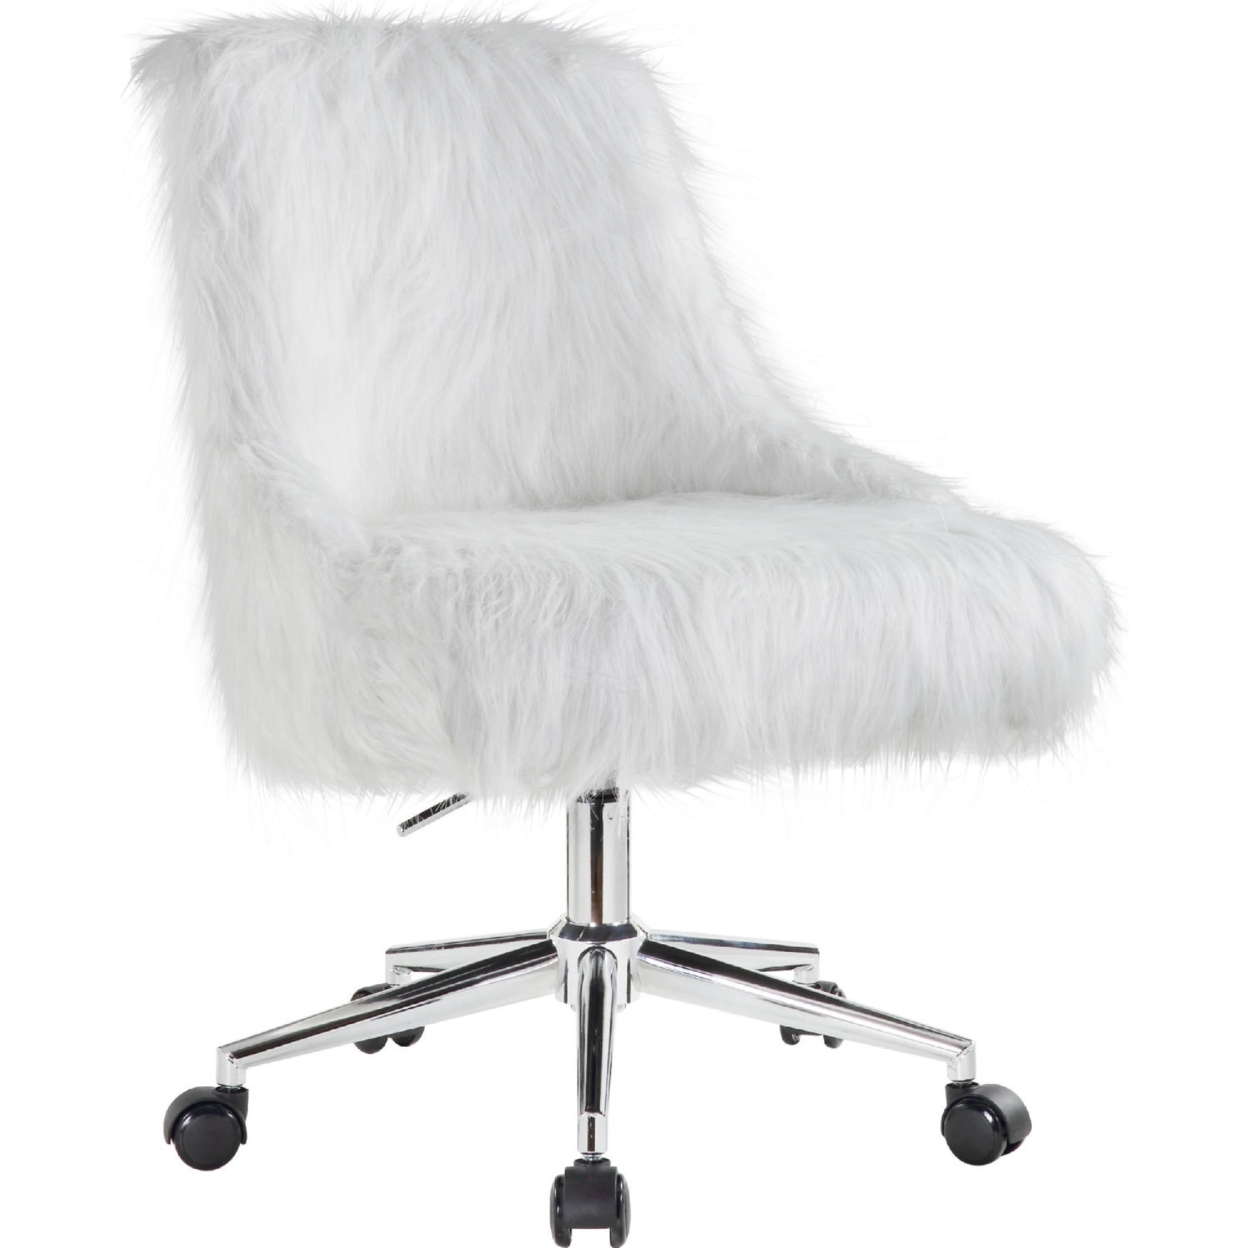 Swivel Office Chair With Faux Fur Fabric, White And Chrome- Saltoro Sherpi